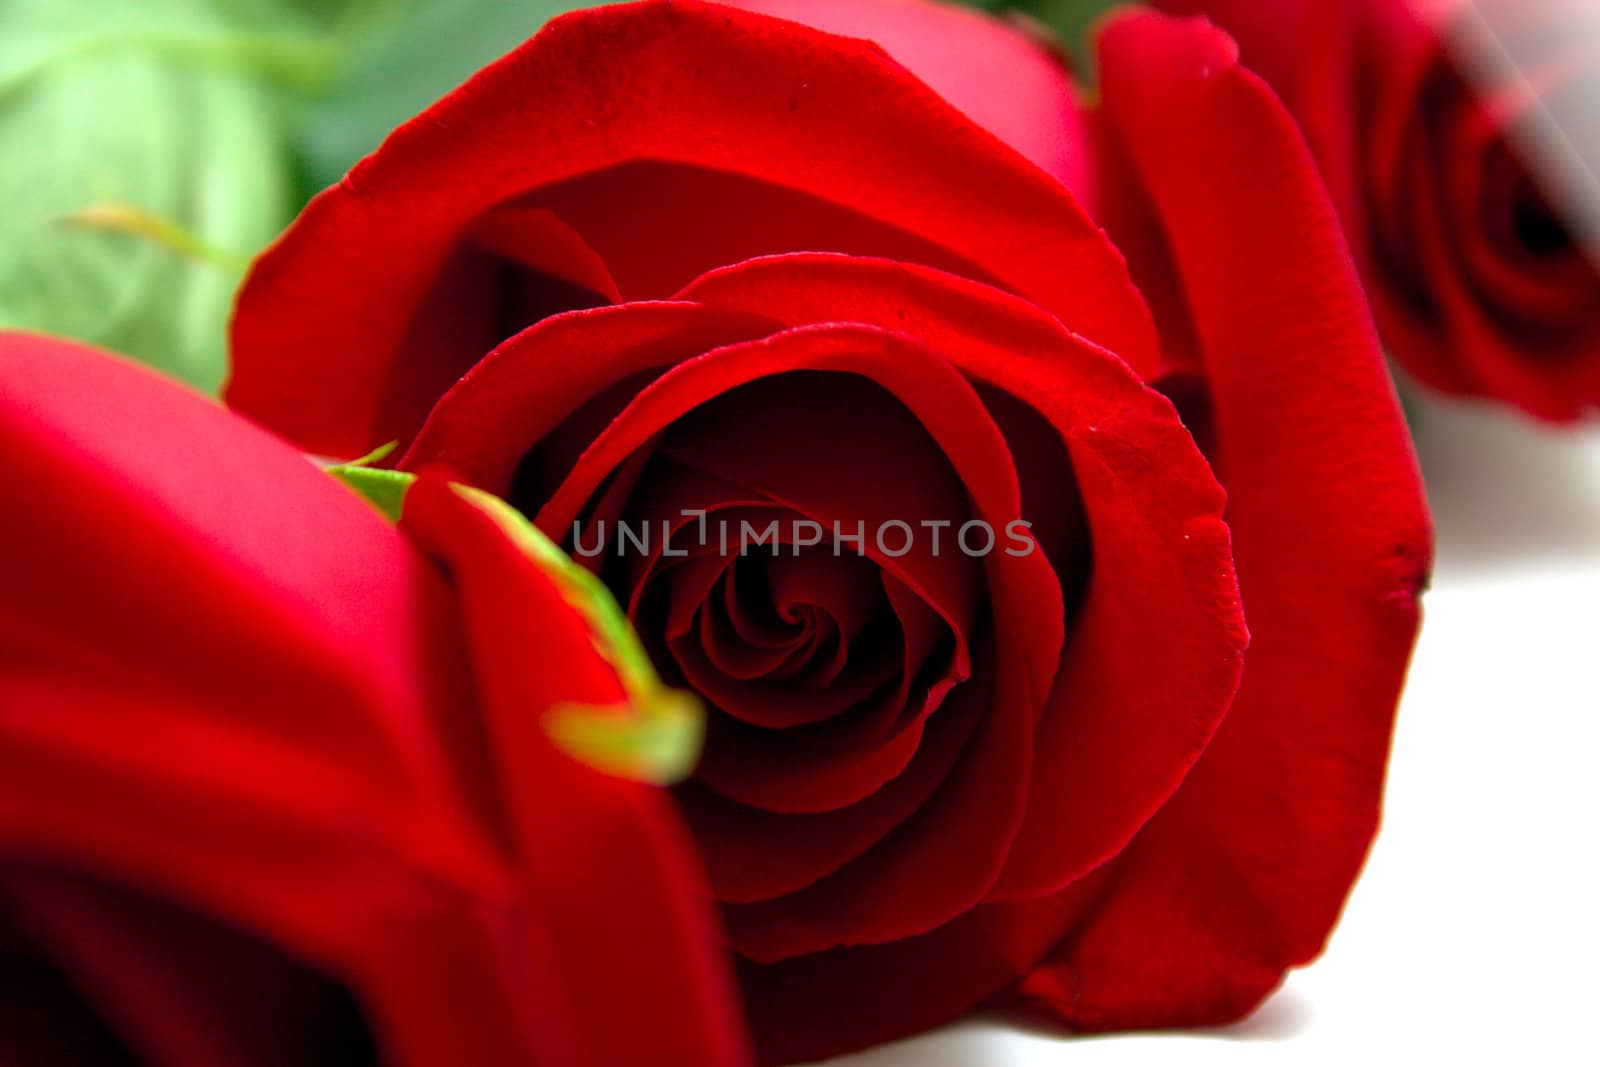 Red roses with green leaves. Macro